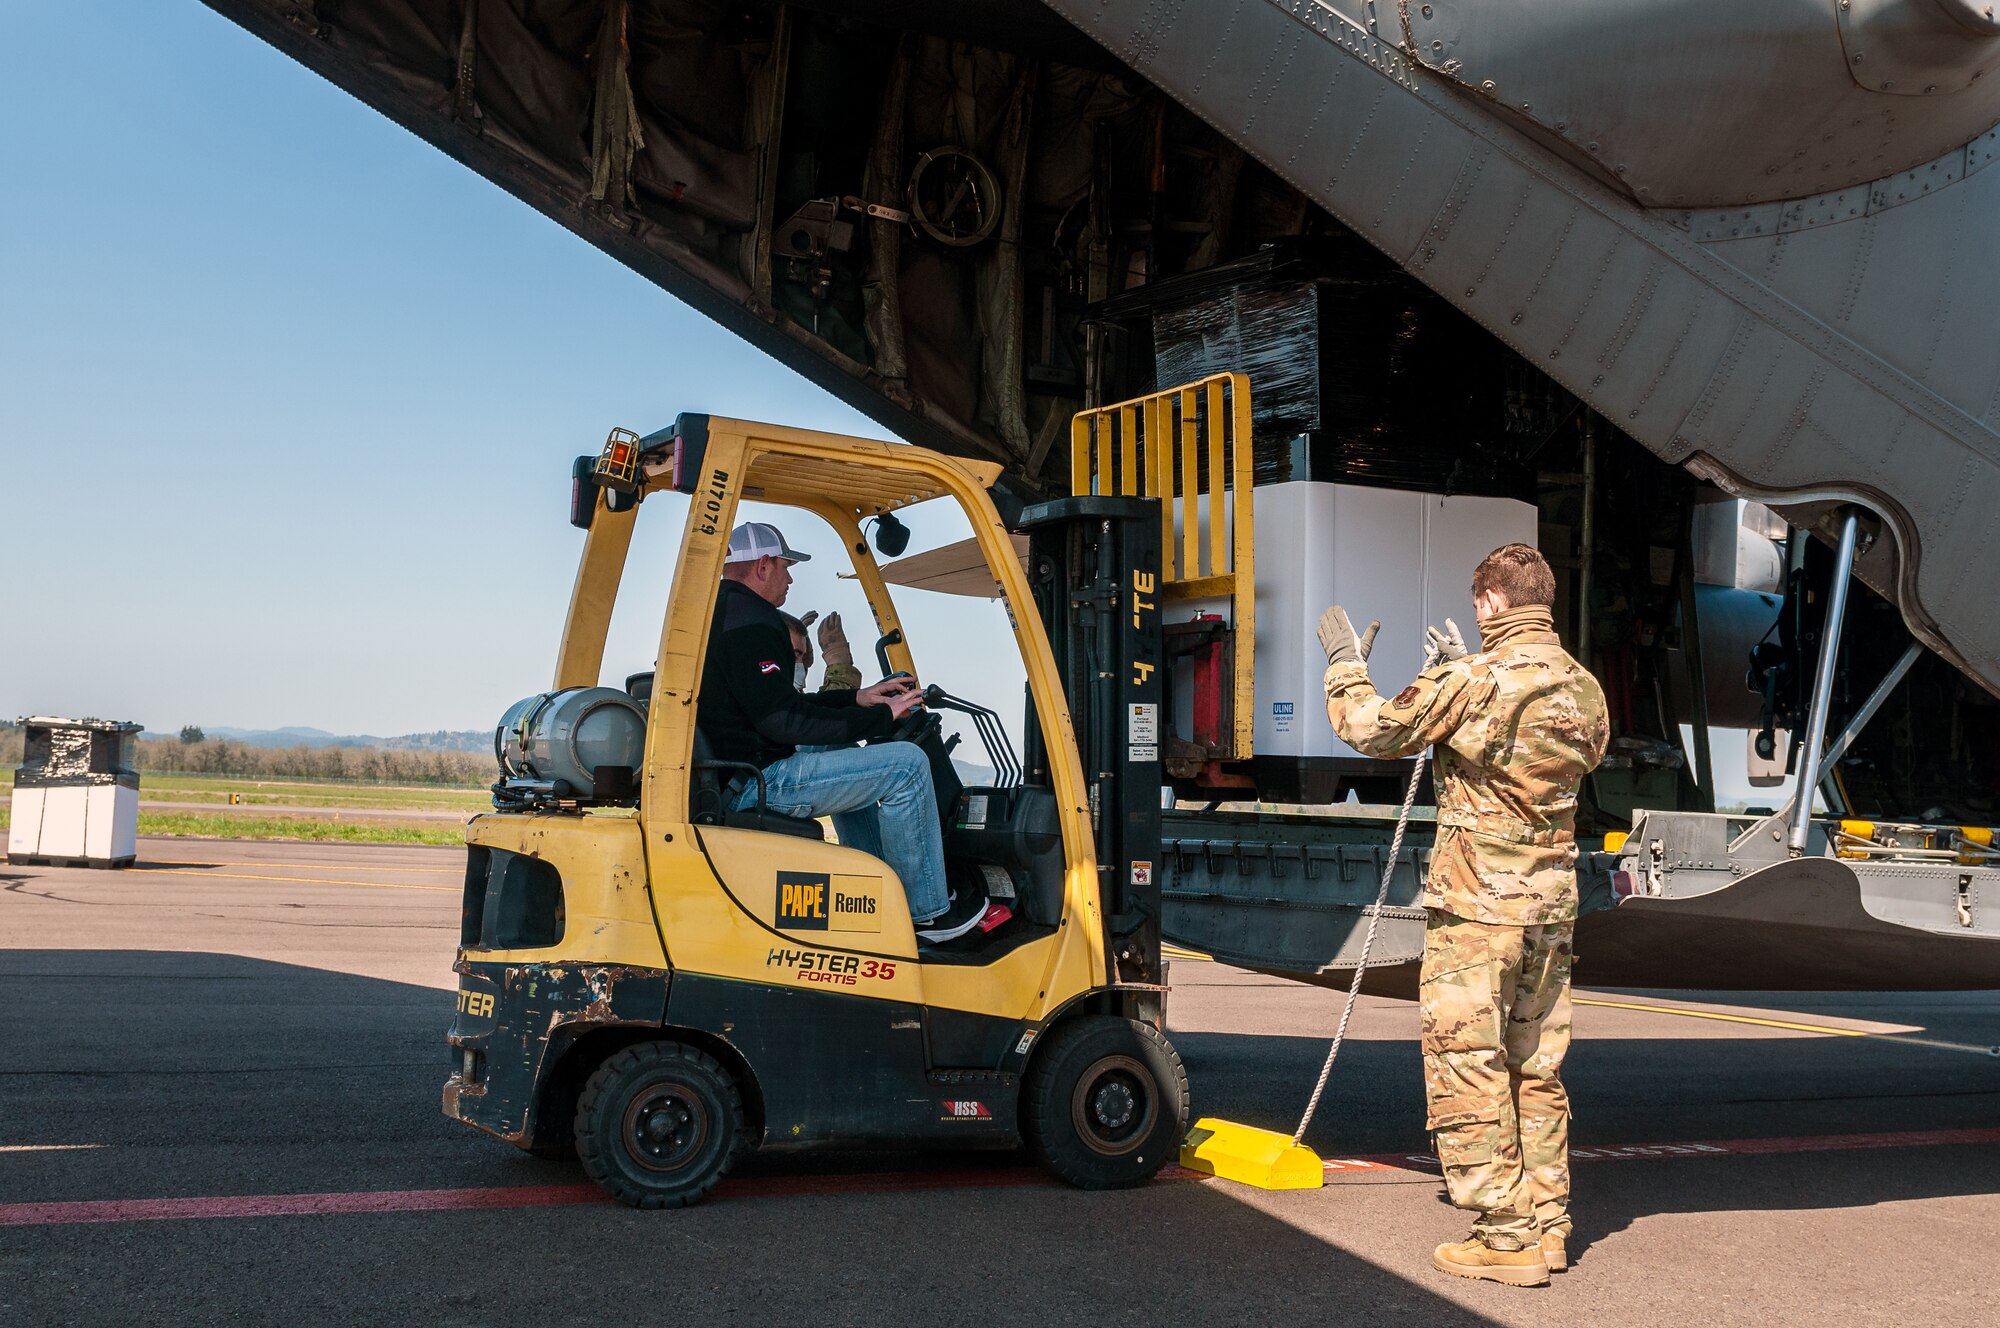 Cargo being loaded onto aircraft.